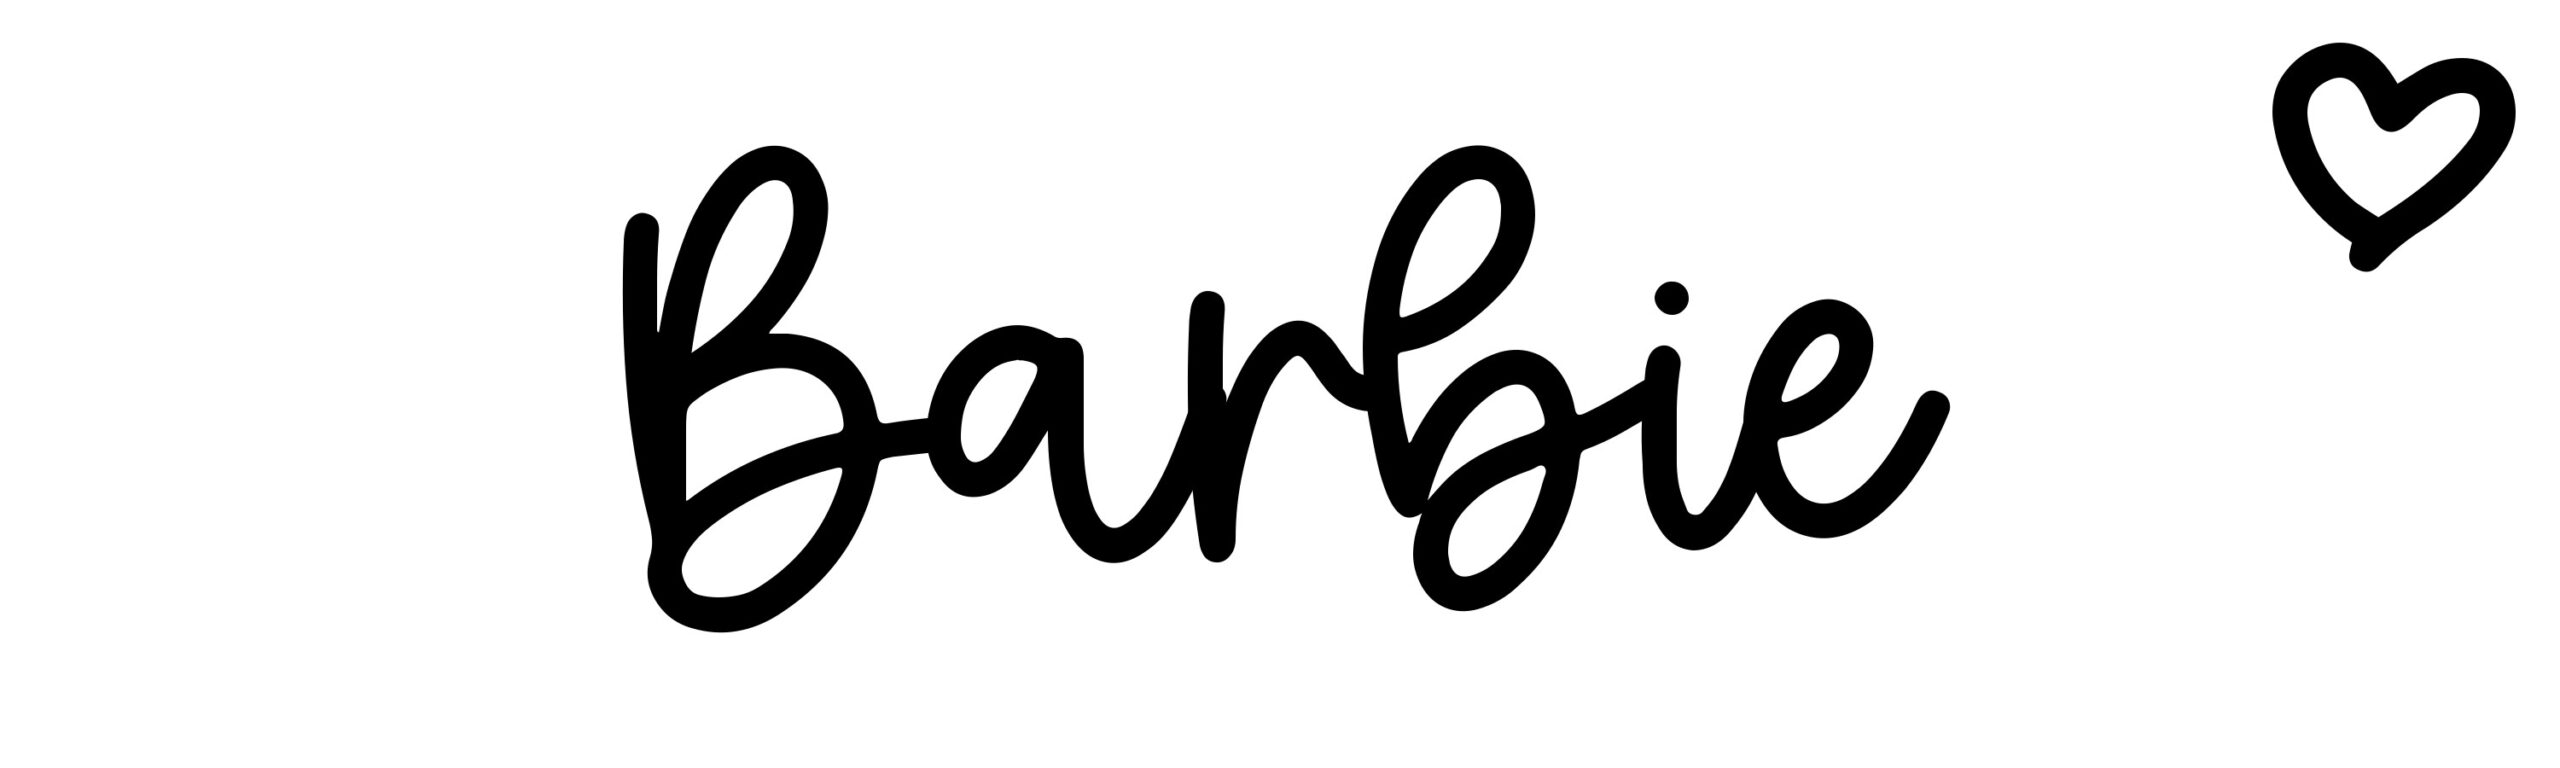 Barbie - Name meaning, origin, variations and more